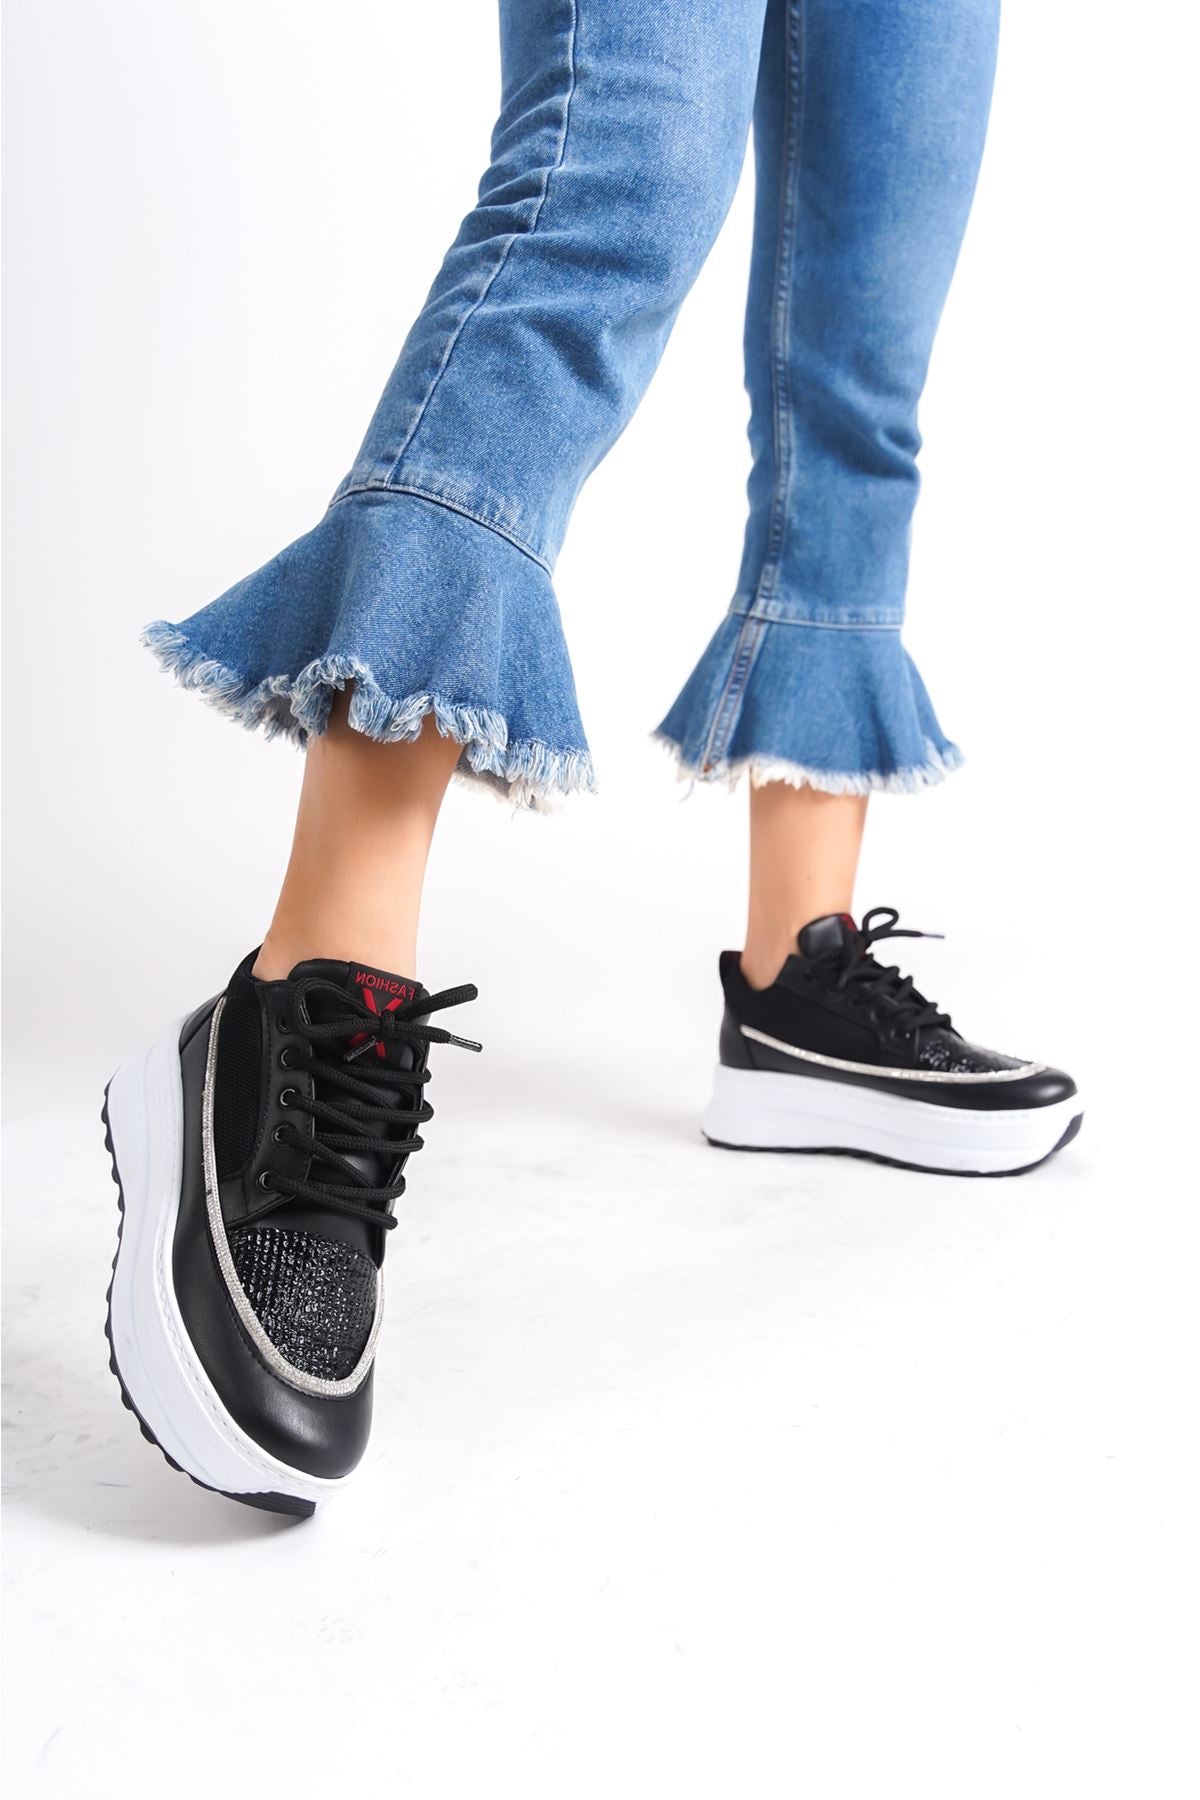 Oneo Black White Women's Sneakers Shoes - STREETMODE ™